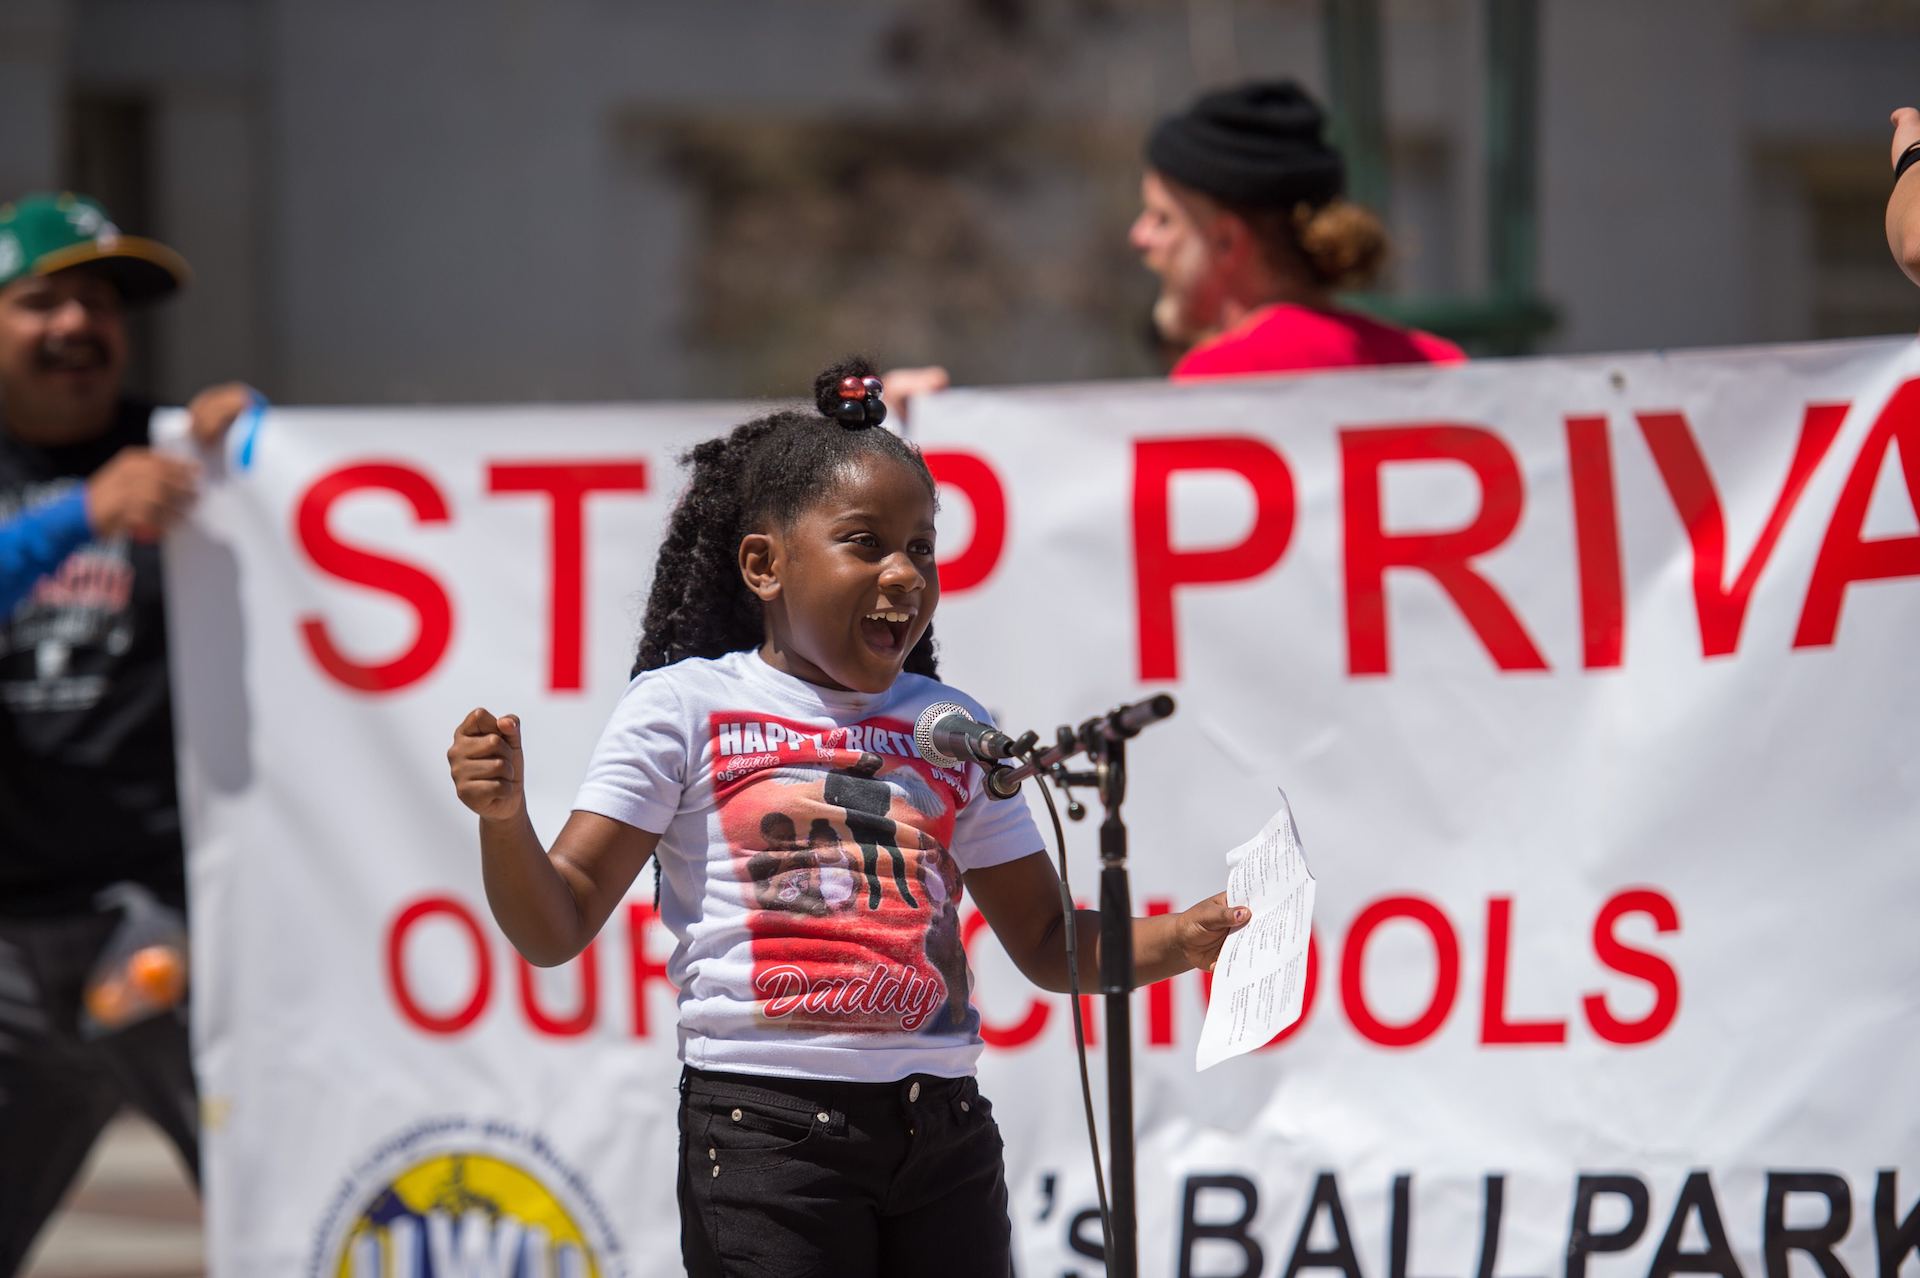 A young girl speaks into a microphone in front of a large banner.